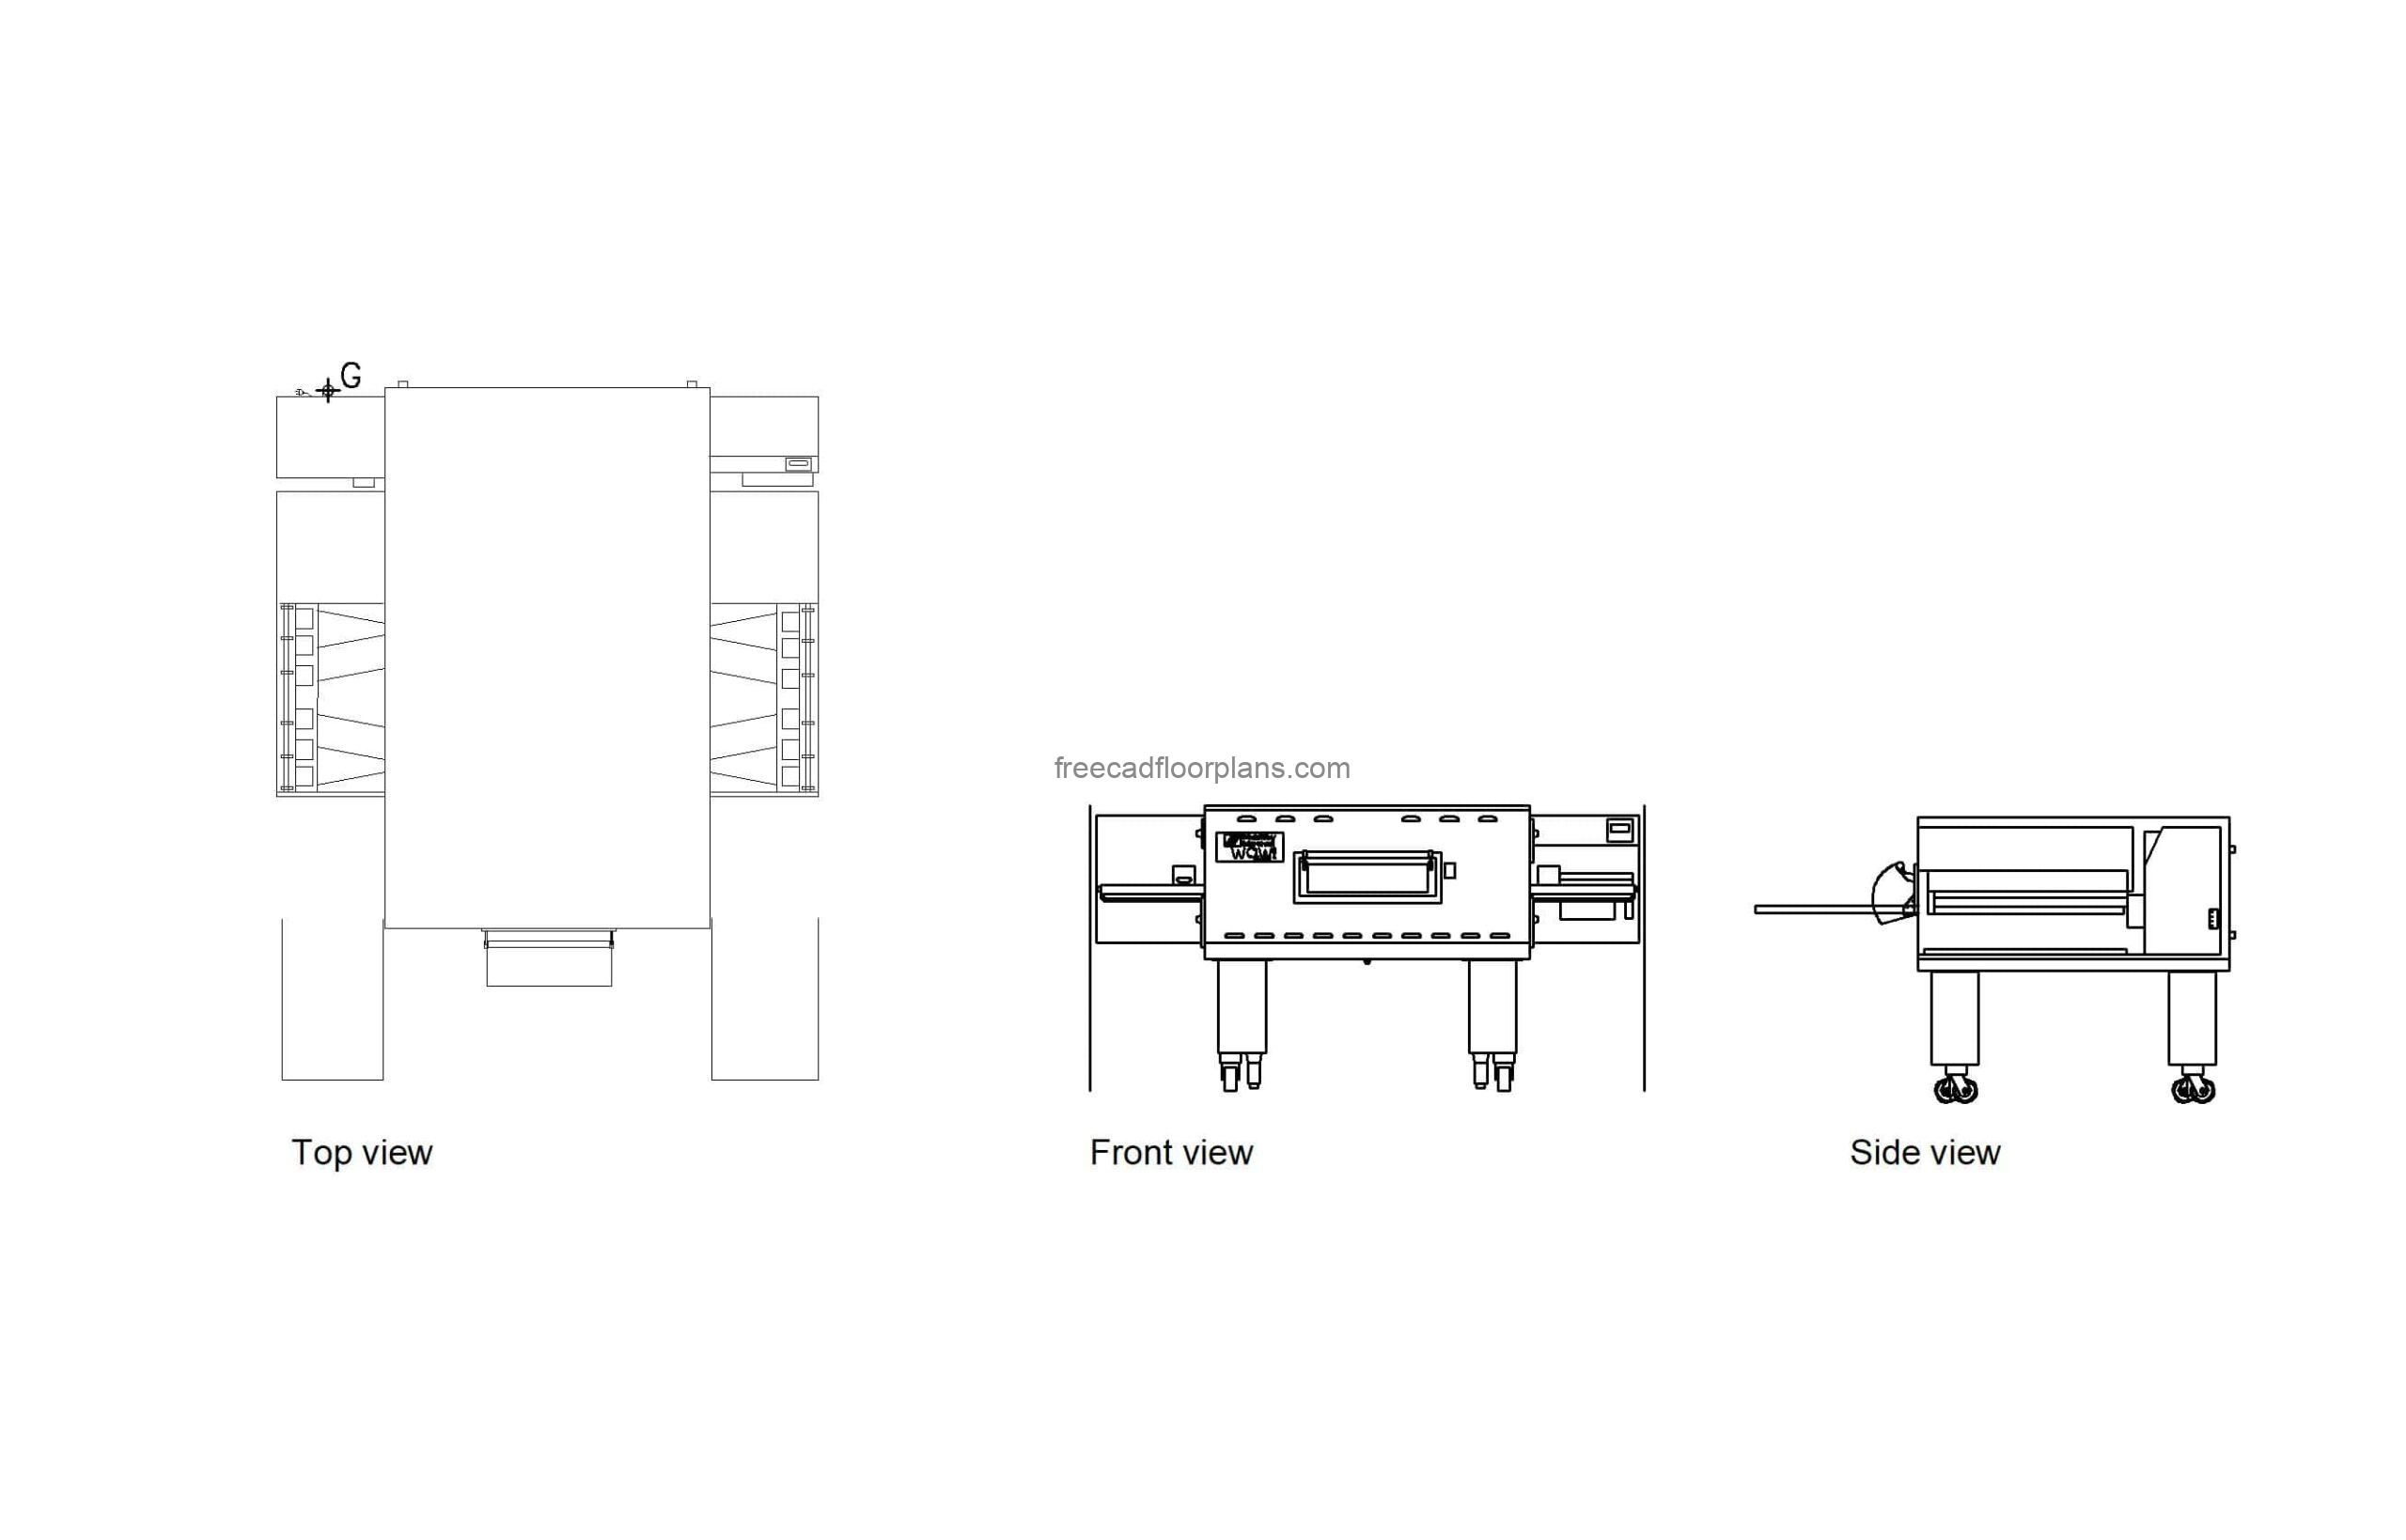 autocad drawing of a conveyor pizza oven plan and elevation 2d views, dwg file free for download